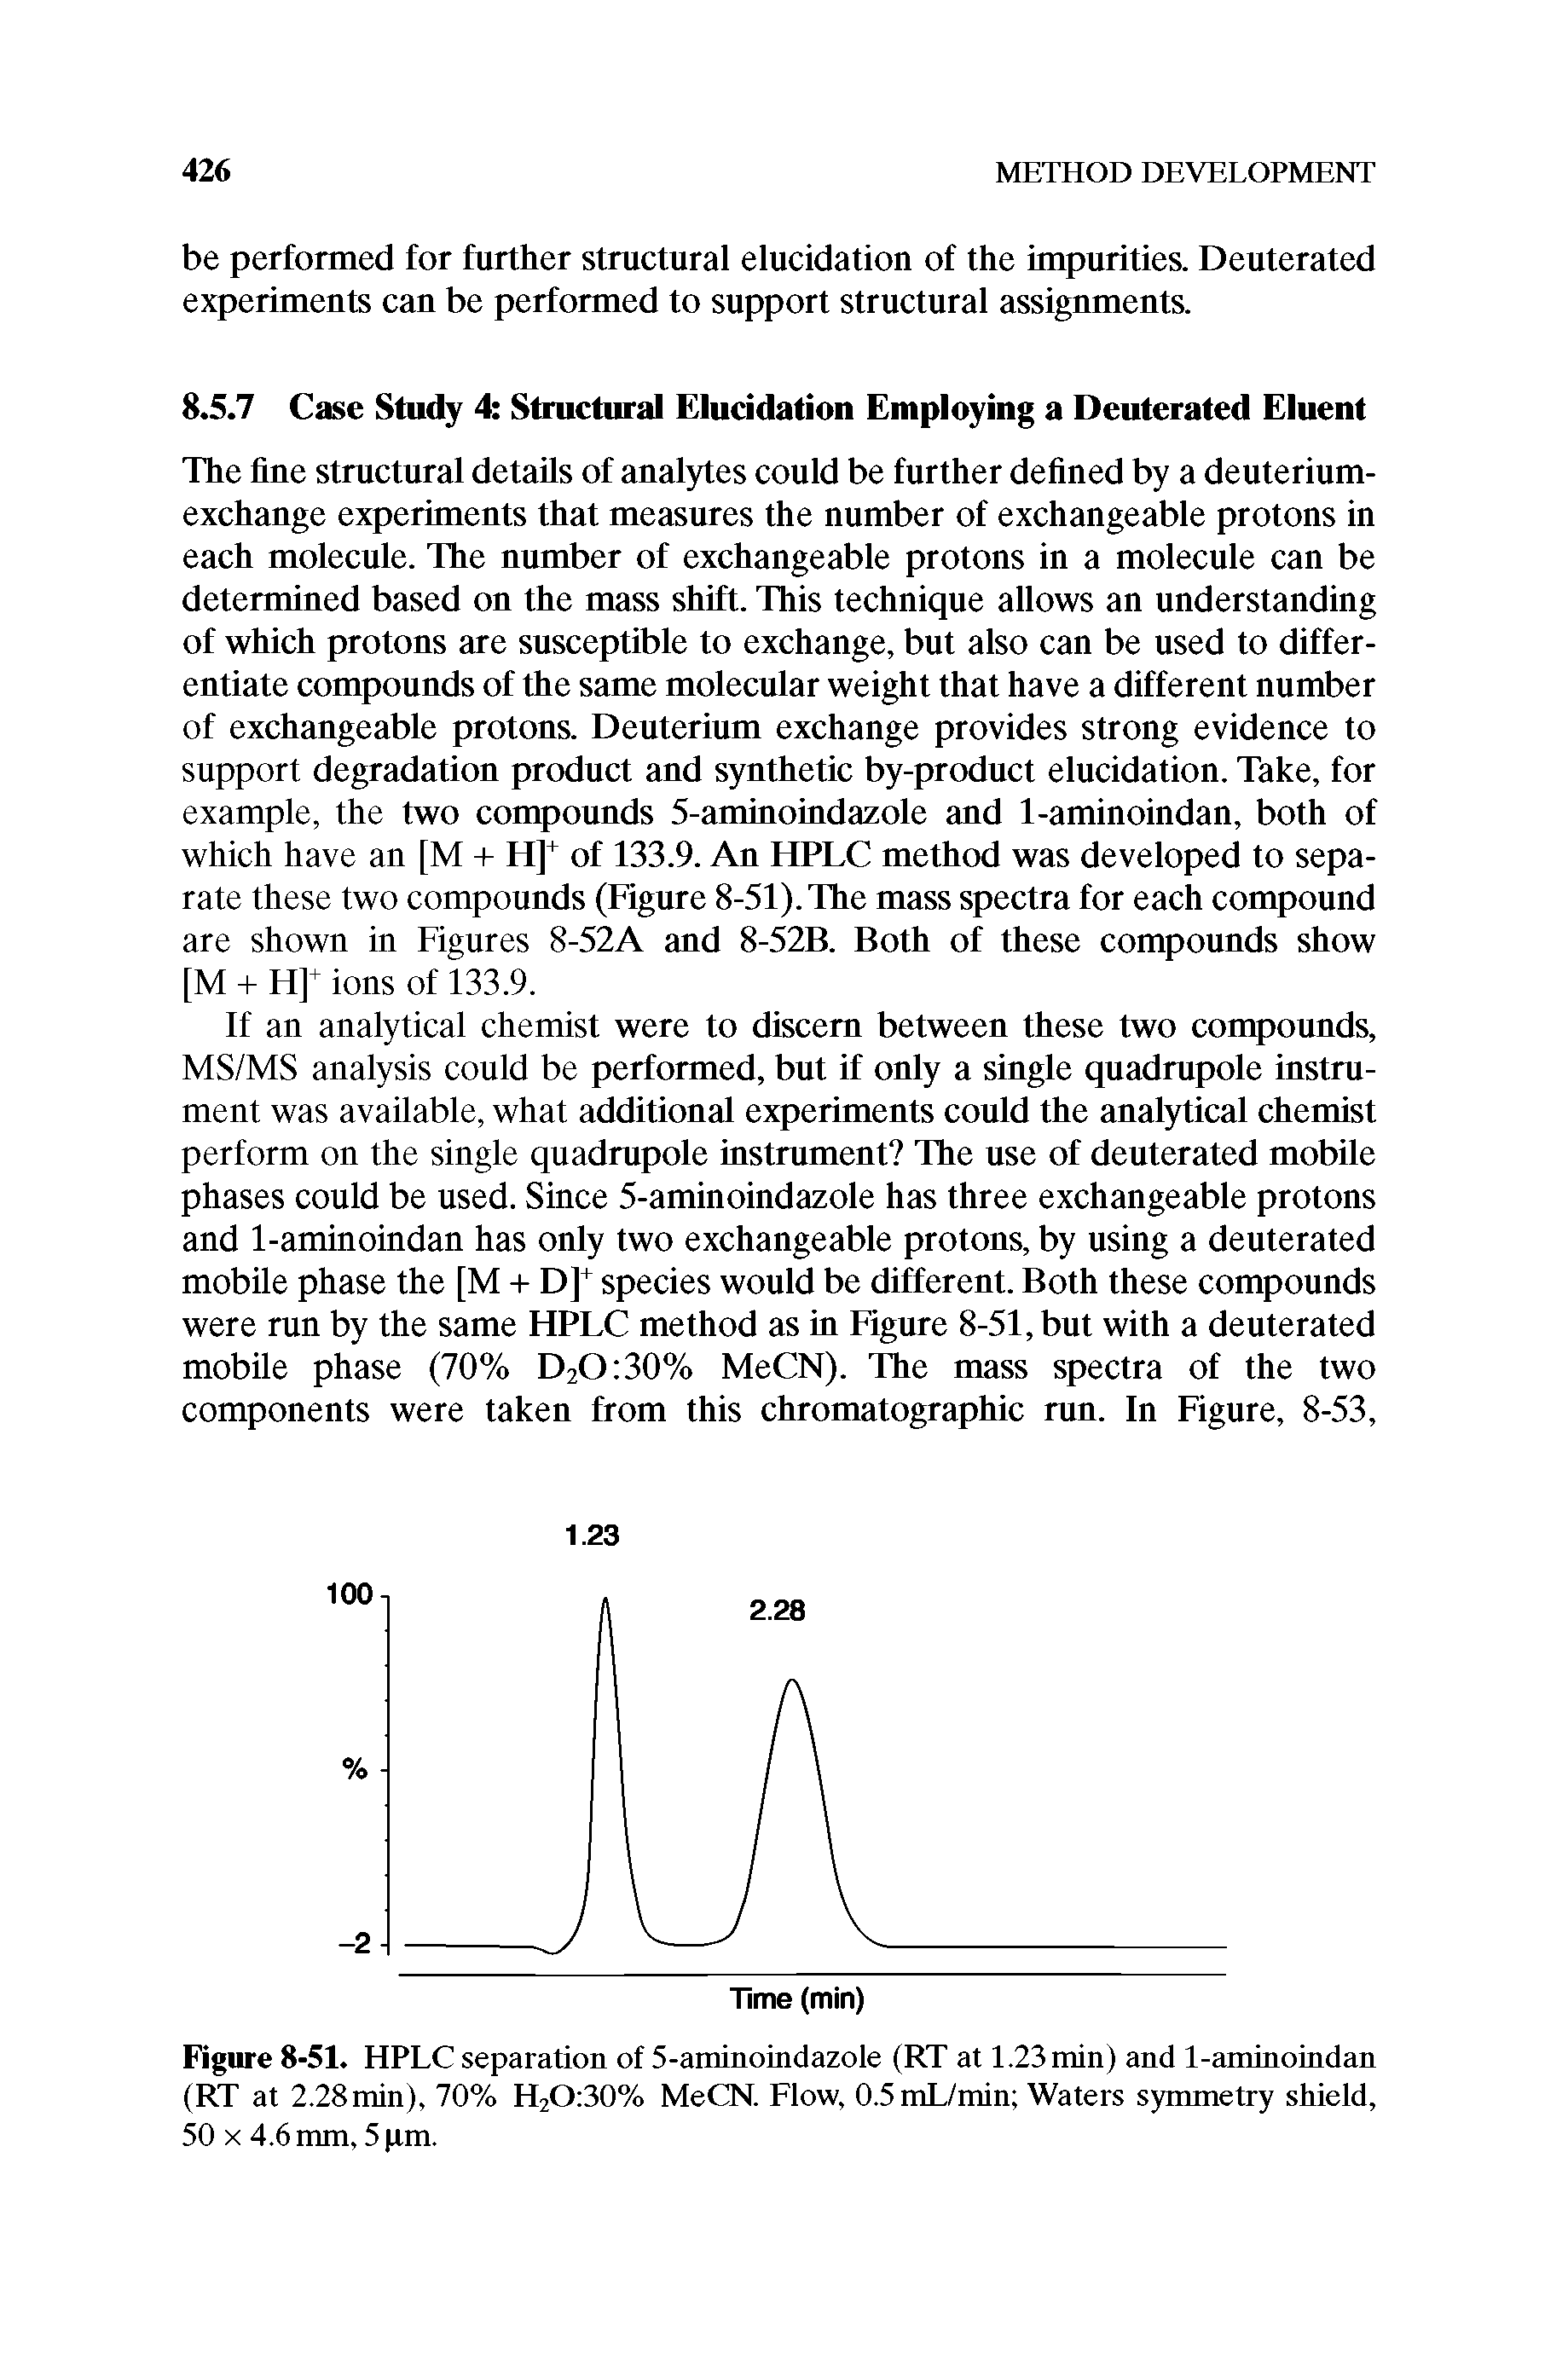 Figure 8-51. HPLC separation of 5-aminomdazole (RT at 1.23 min) and 1-aminoindan (RT at 2.28min), 70% H2O 30% MeCN. Flow, 0.5mL/min Waters symmetry shield, 50 X 4.6 mm, 5 tm.